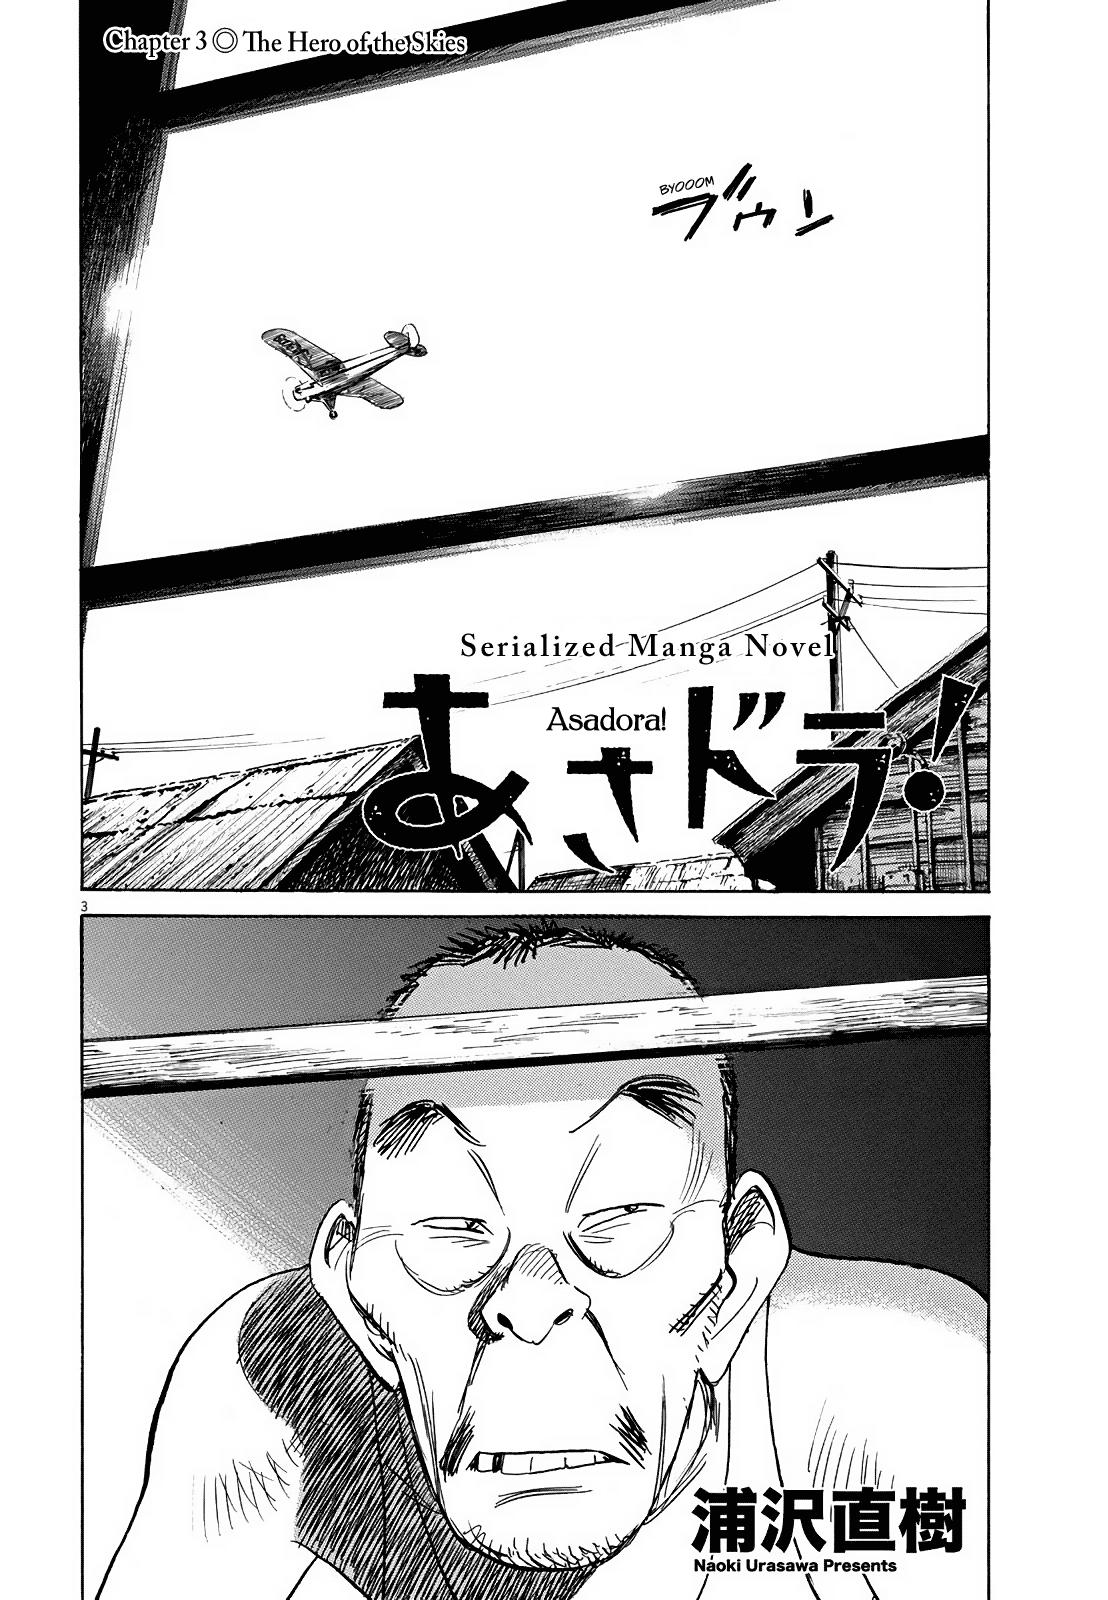 Asadora! Vol. 1 Ch. 3 The Hero of the Skies